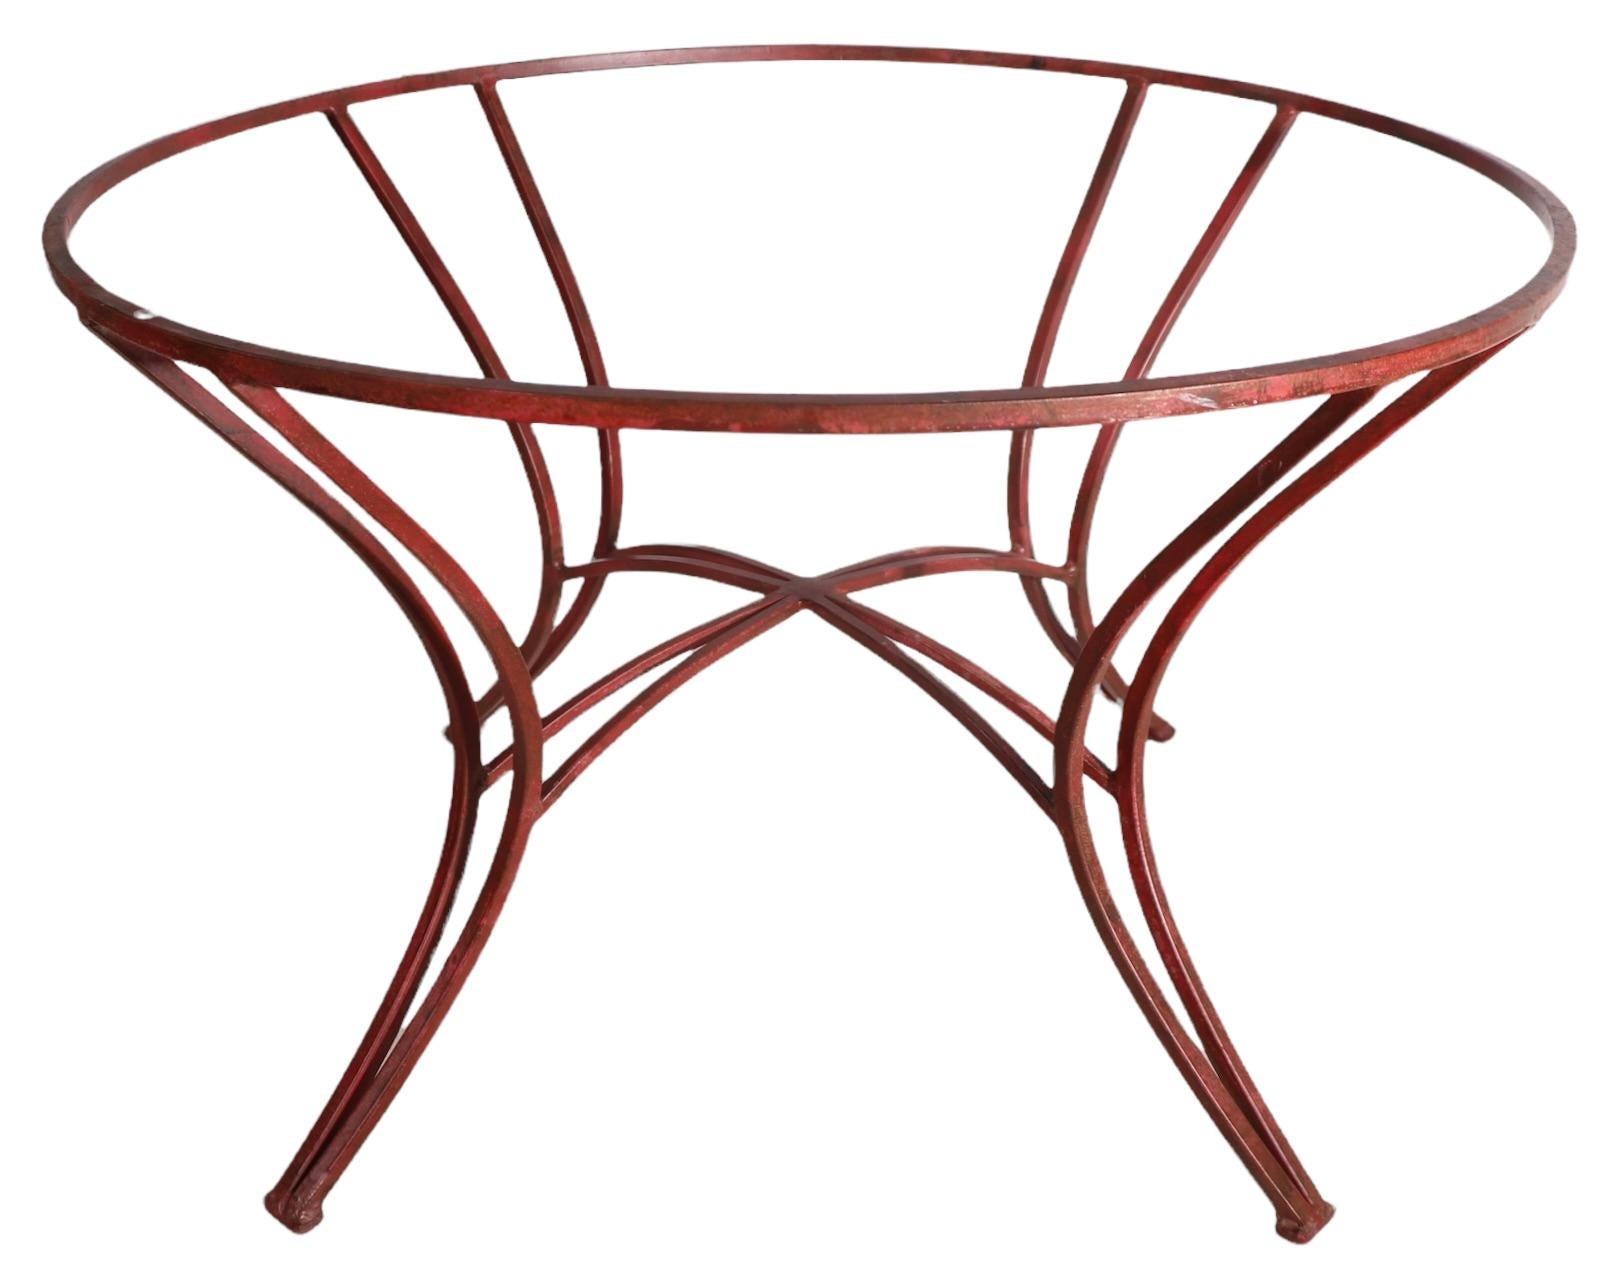 20th Century Wrought Iron and Glass Side Table Suitable for Patio, Garden or Poolside Use For Sale